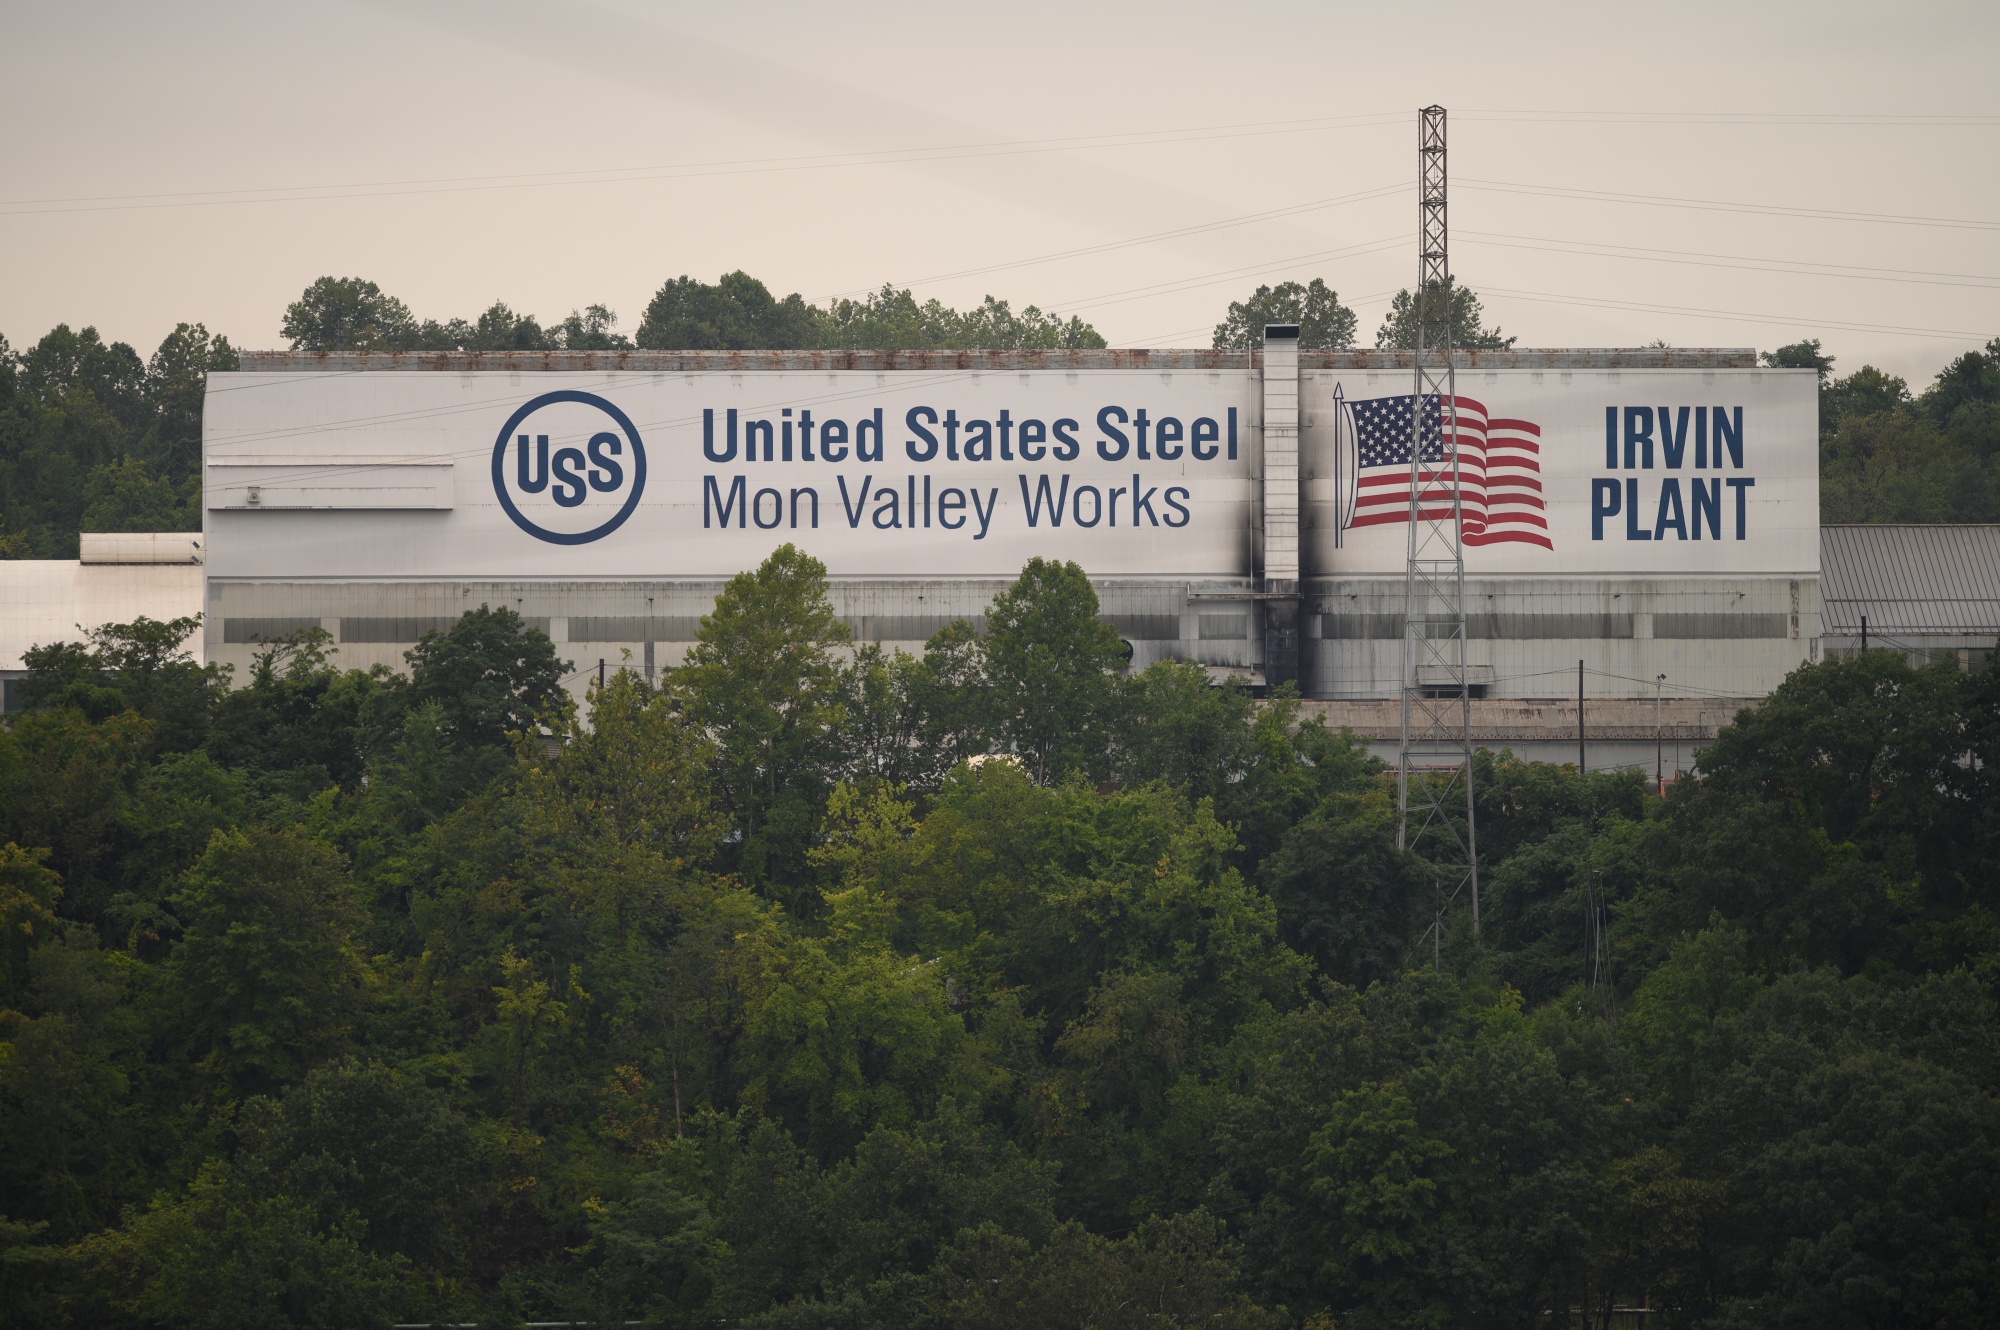 Biden emphasizes importance of U.S. Steel's domestic ownership and operation (Credits: Bloomberg)